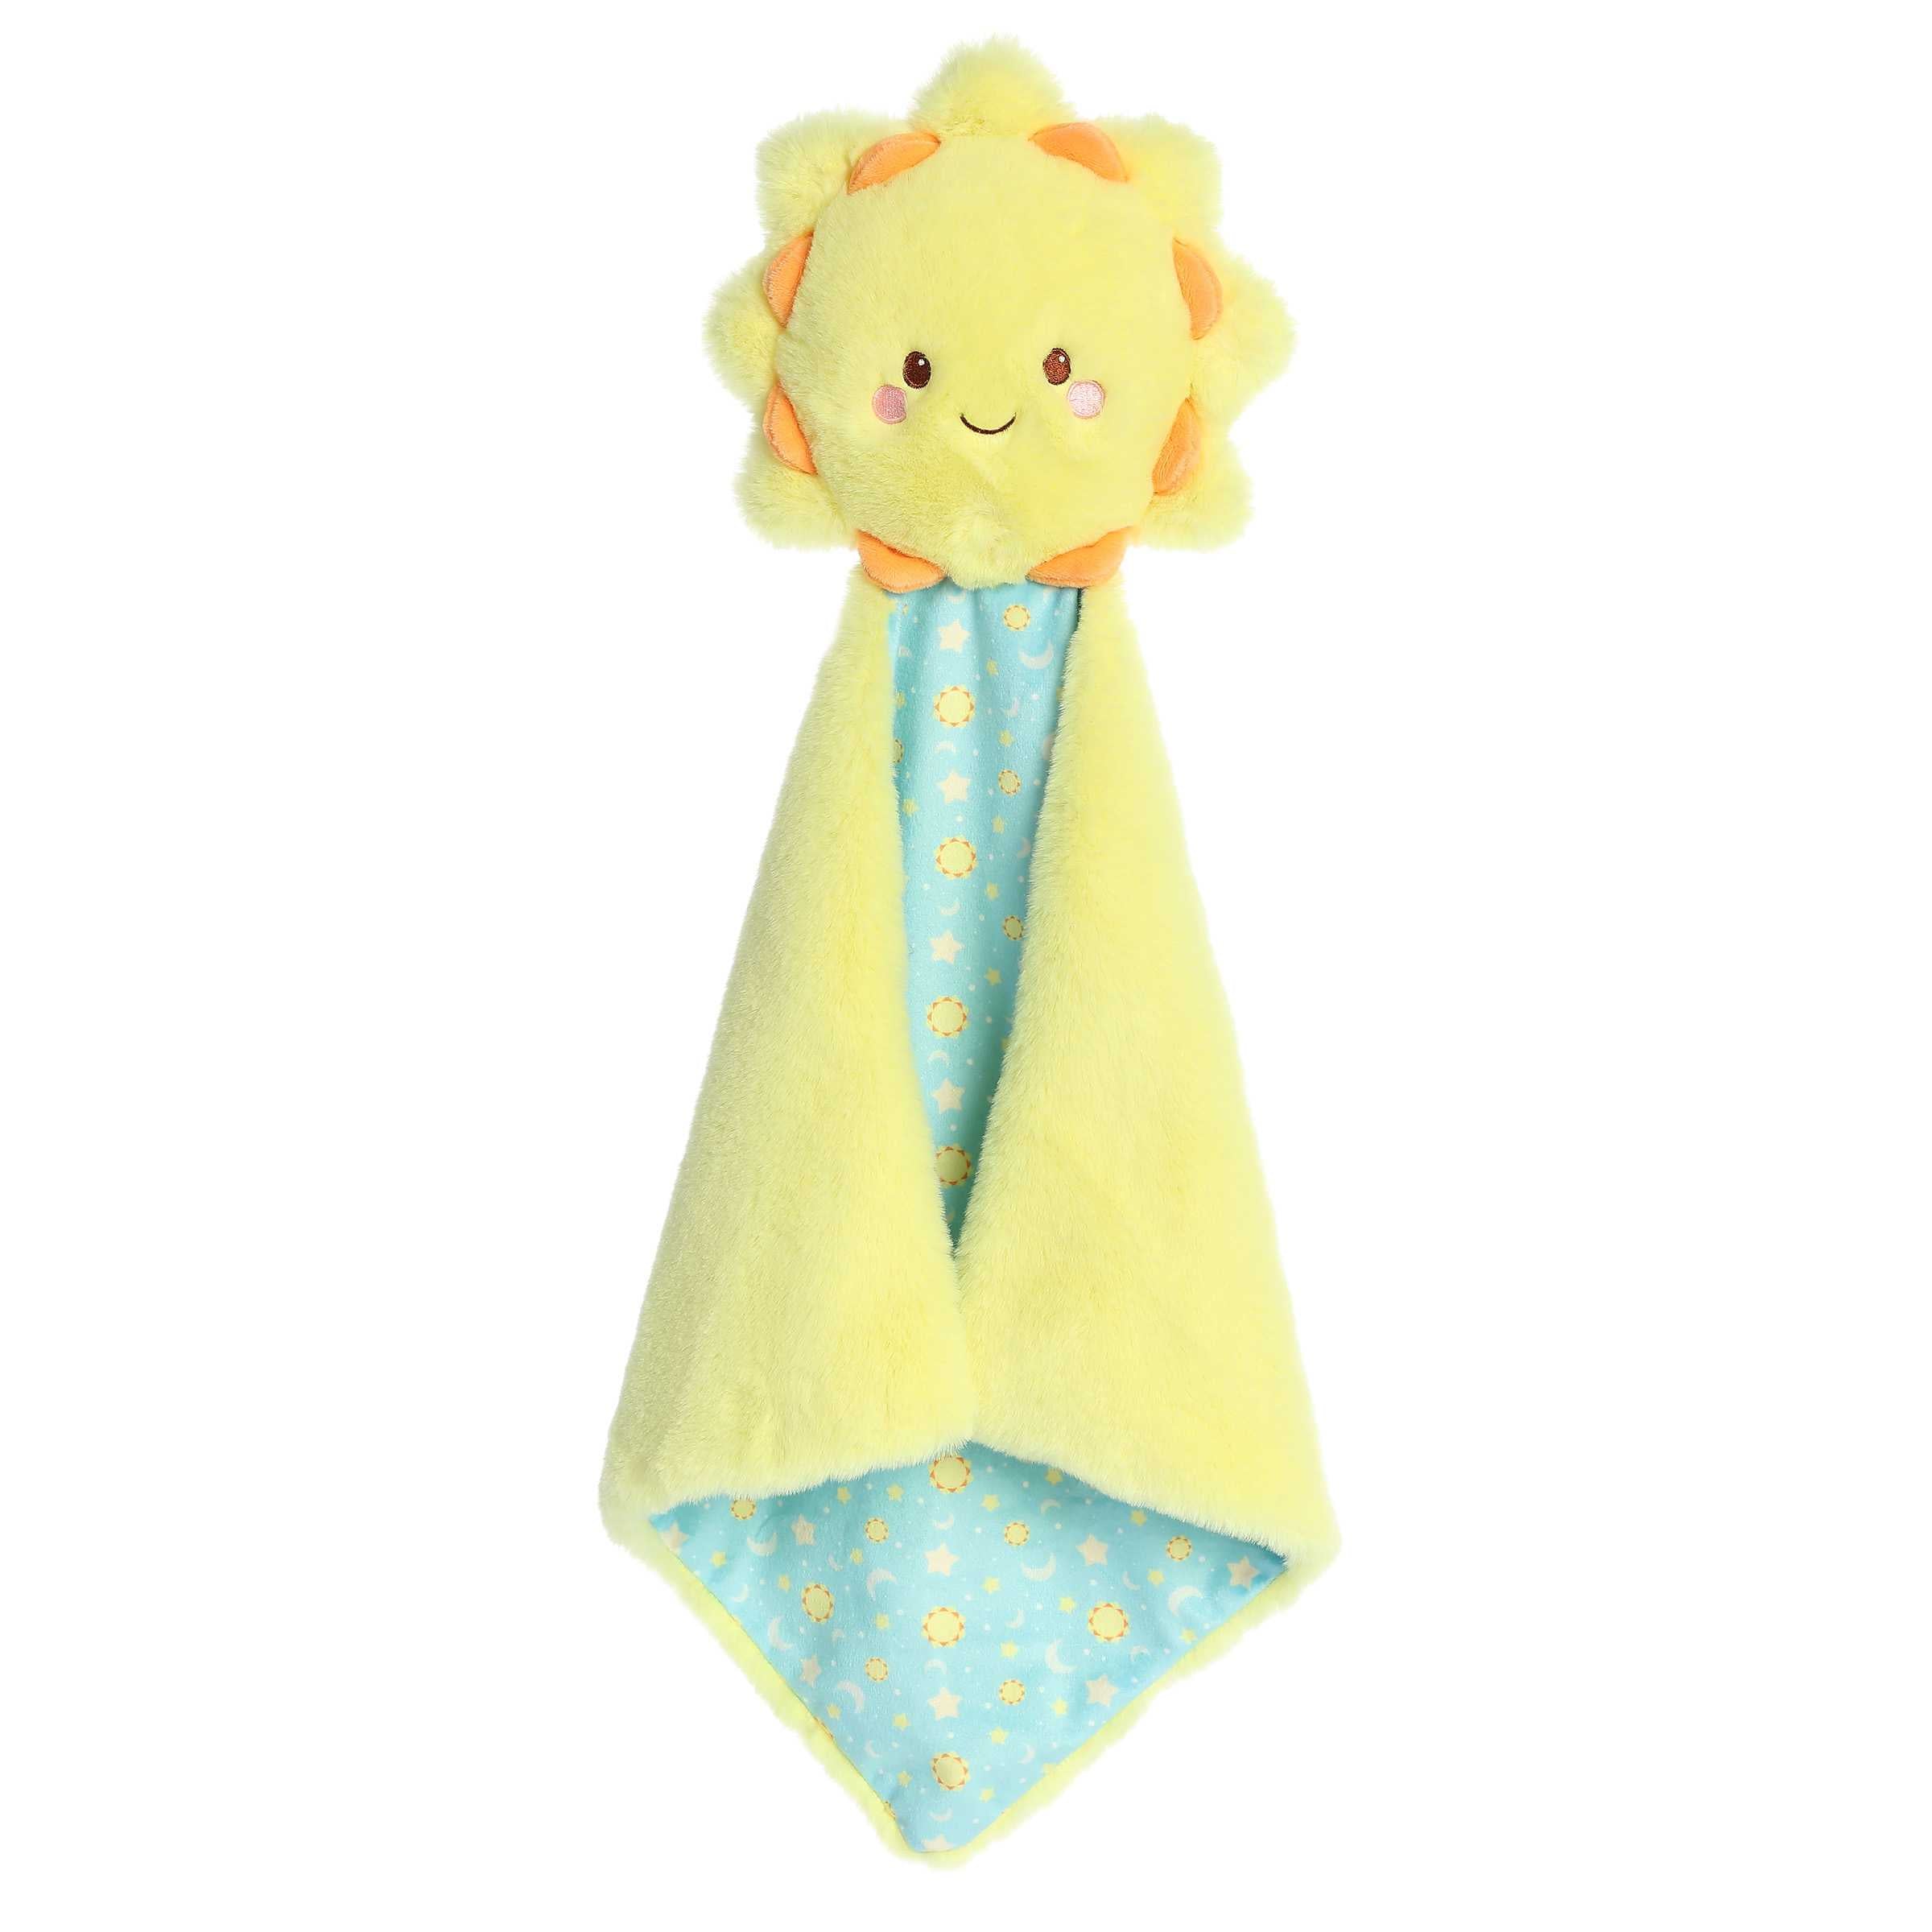 Bright yellow Sun plush with a yellow smiling face and attached white and yellow square shaped space design baby blanket